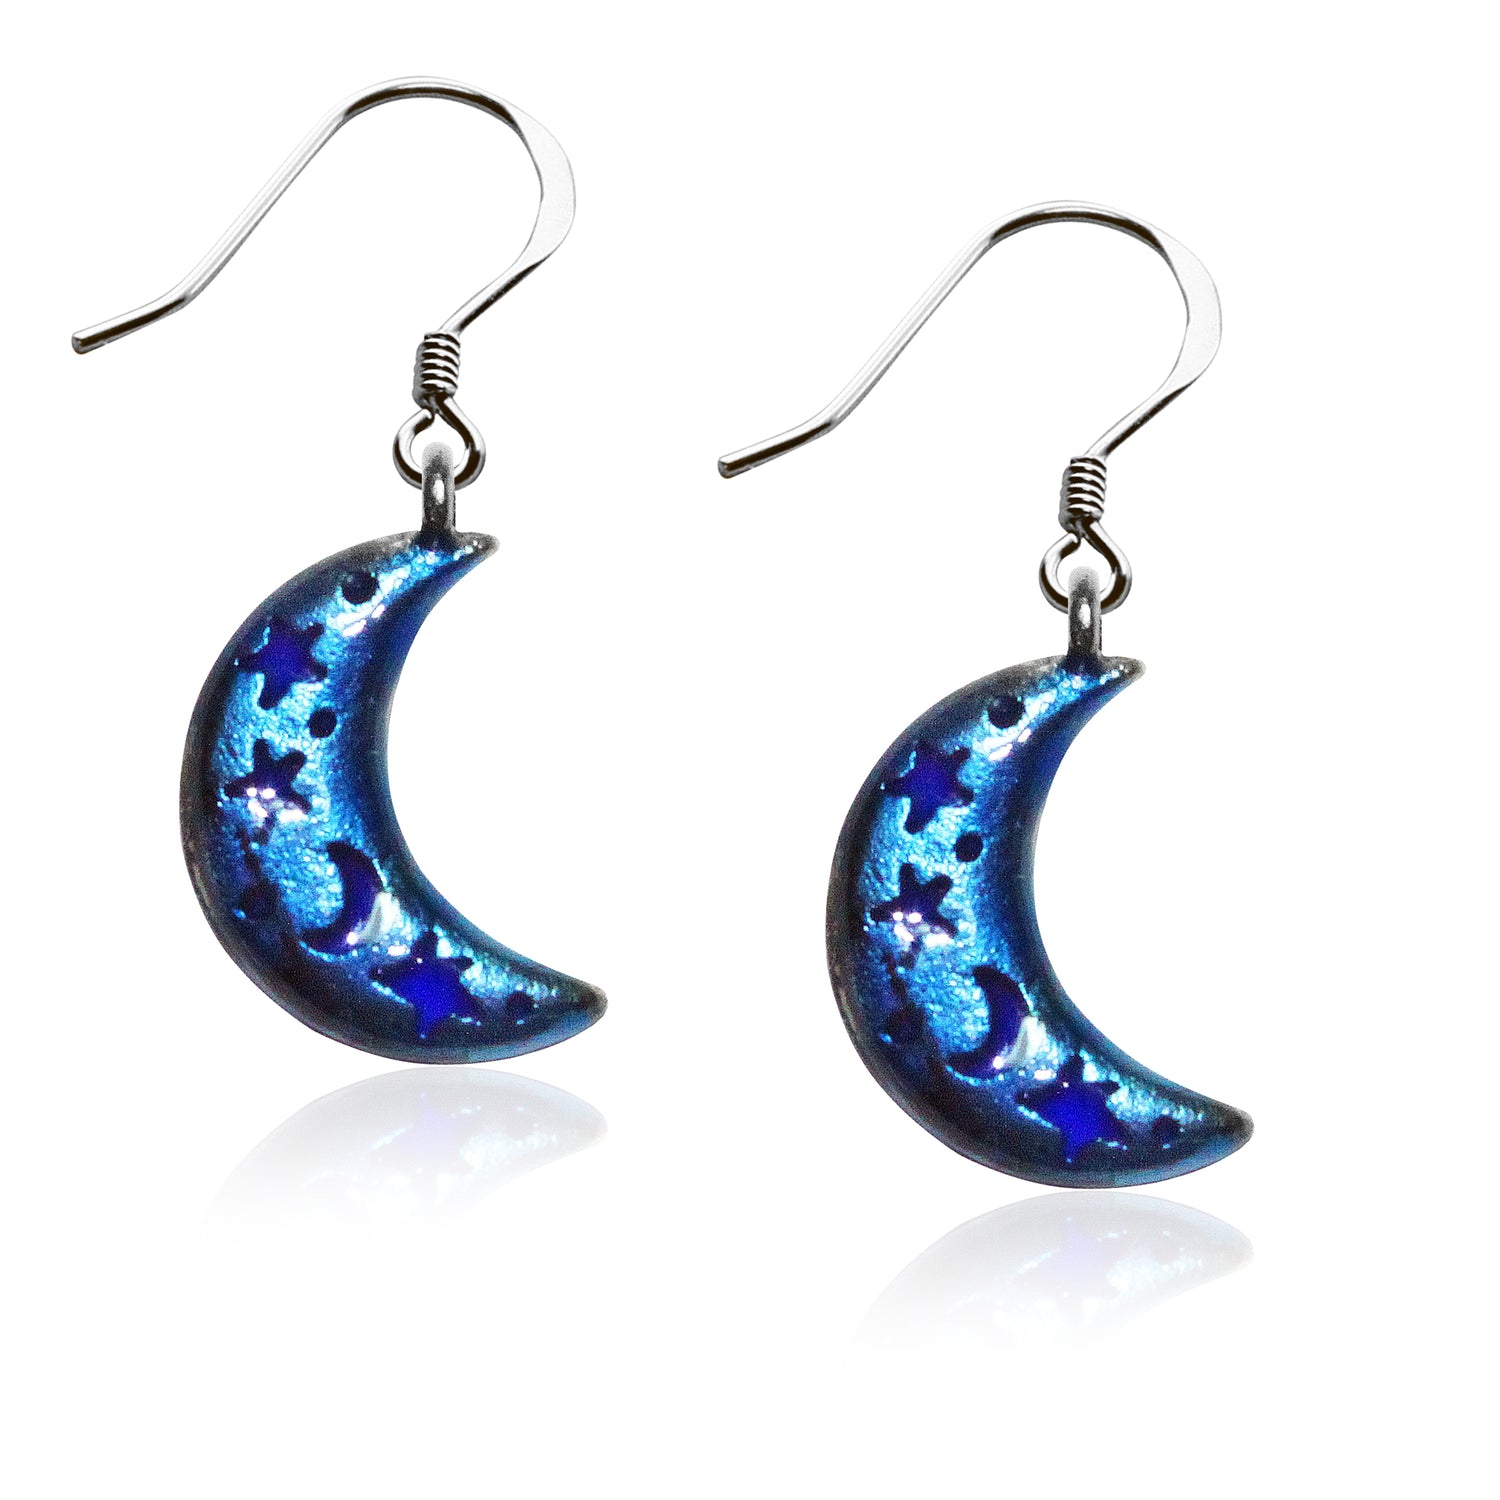 Whimsical Gifts | Astrology Crescent Moon with Celestial Cut-Outs Charm Earrings in Silver Finish | Zodiac & Celestial |  | Jewelry